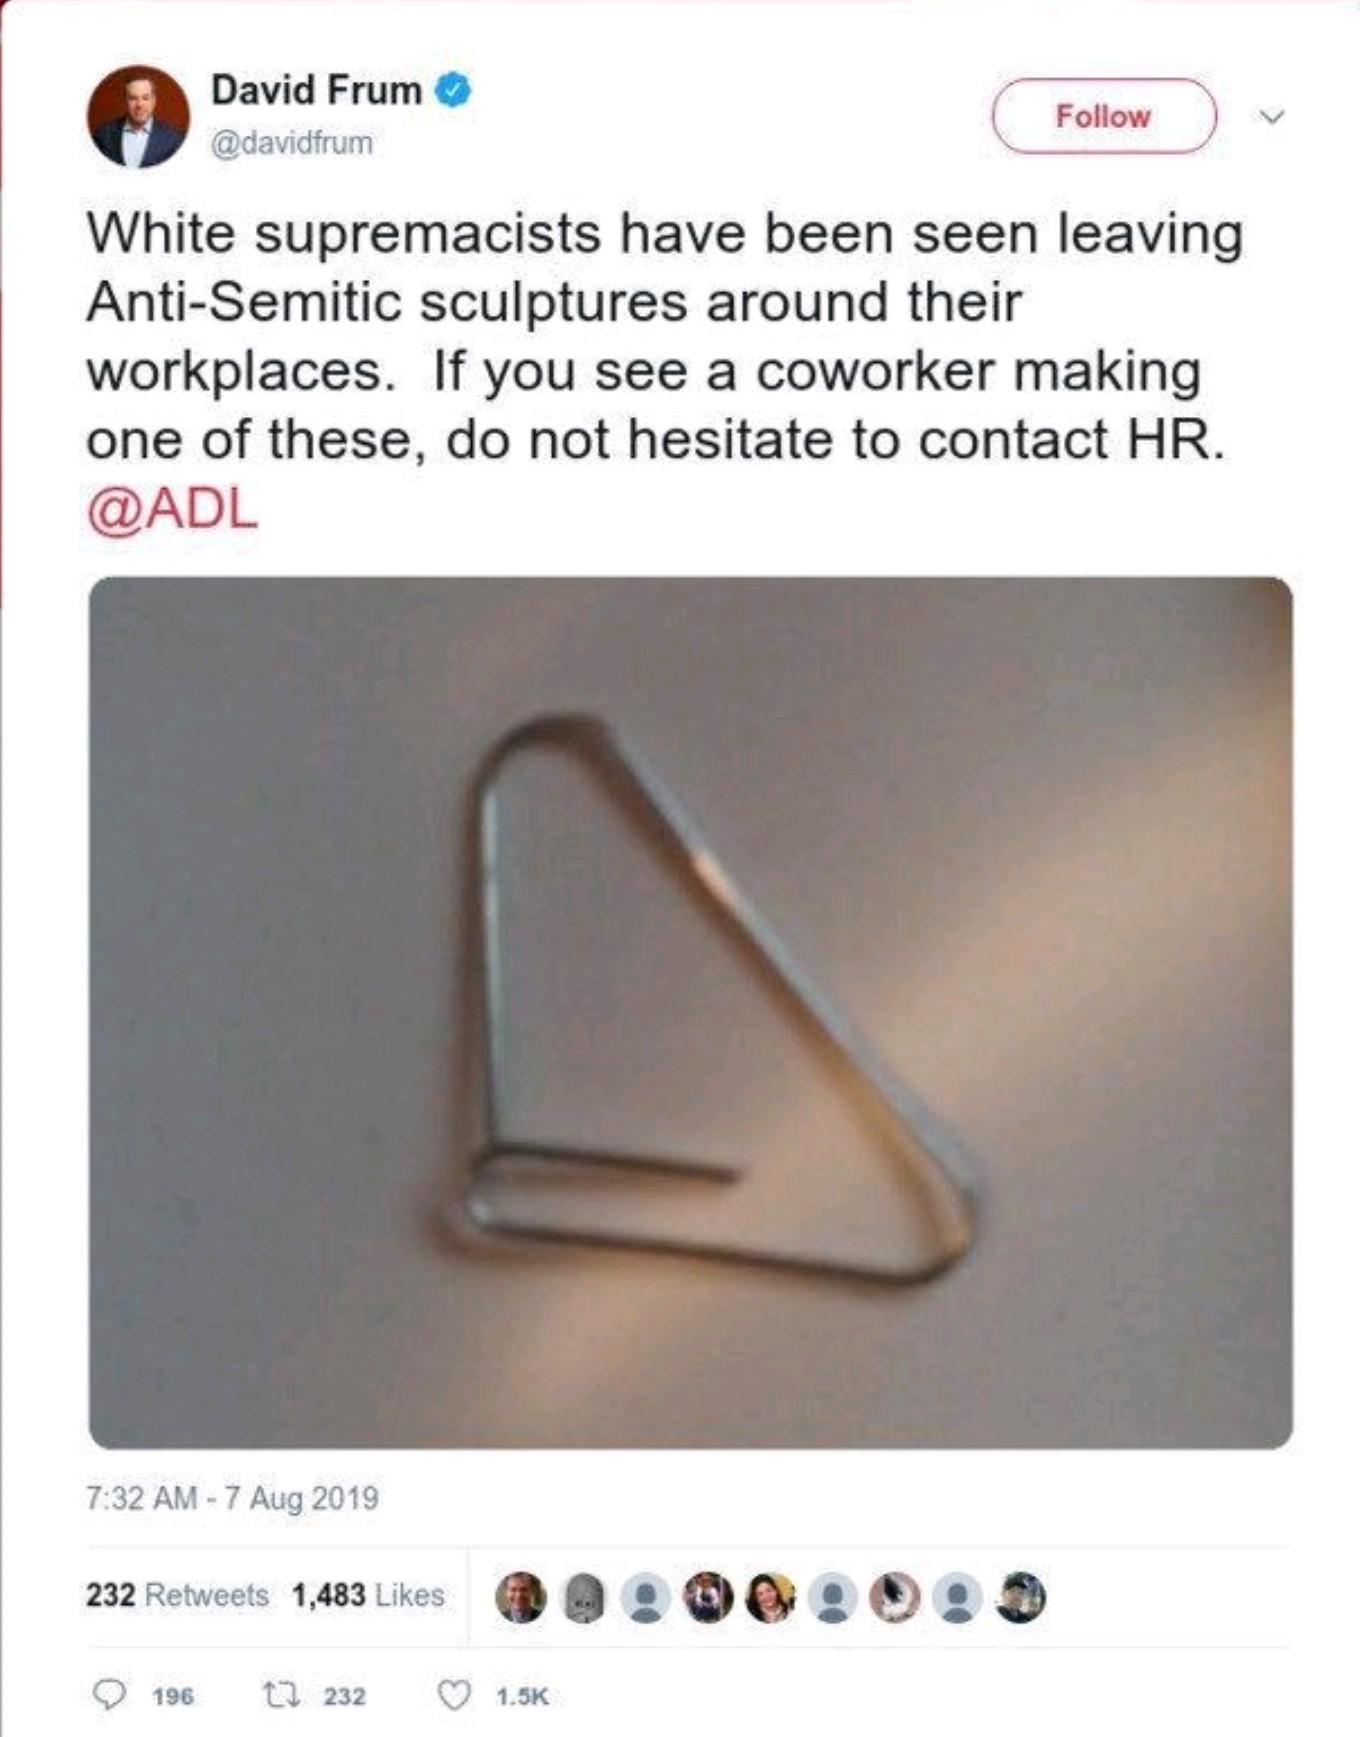 paper clip jew nose - David Frum White supremacists have been seen leaving AntiSemitic sculptures around their workplaces. If you see a coworker making one of these, do not hesitate to contact Hr. 232 1,483 .00. 5 9 196 13 232 2